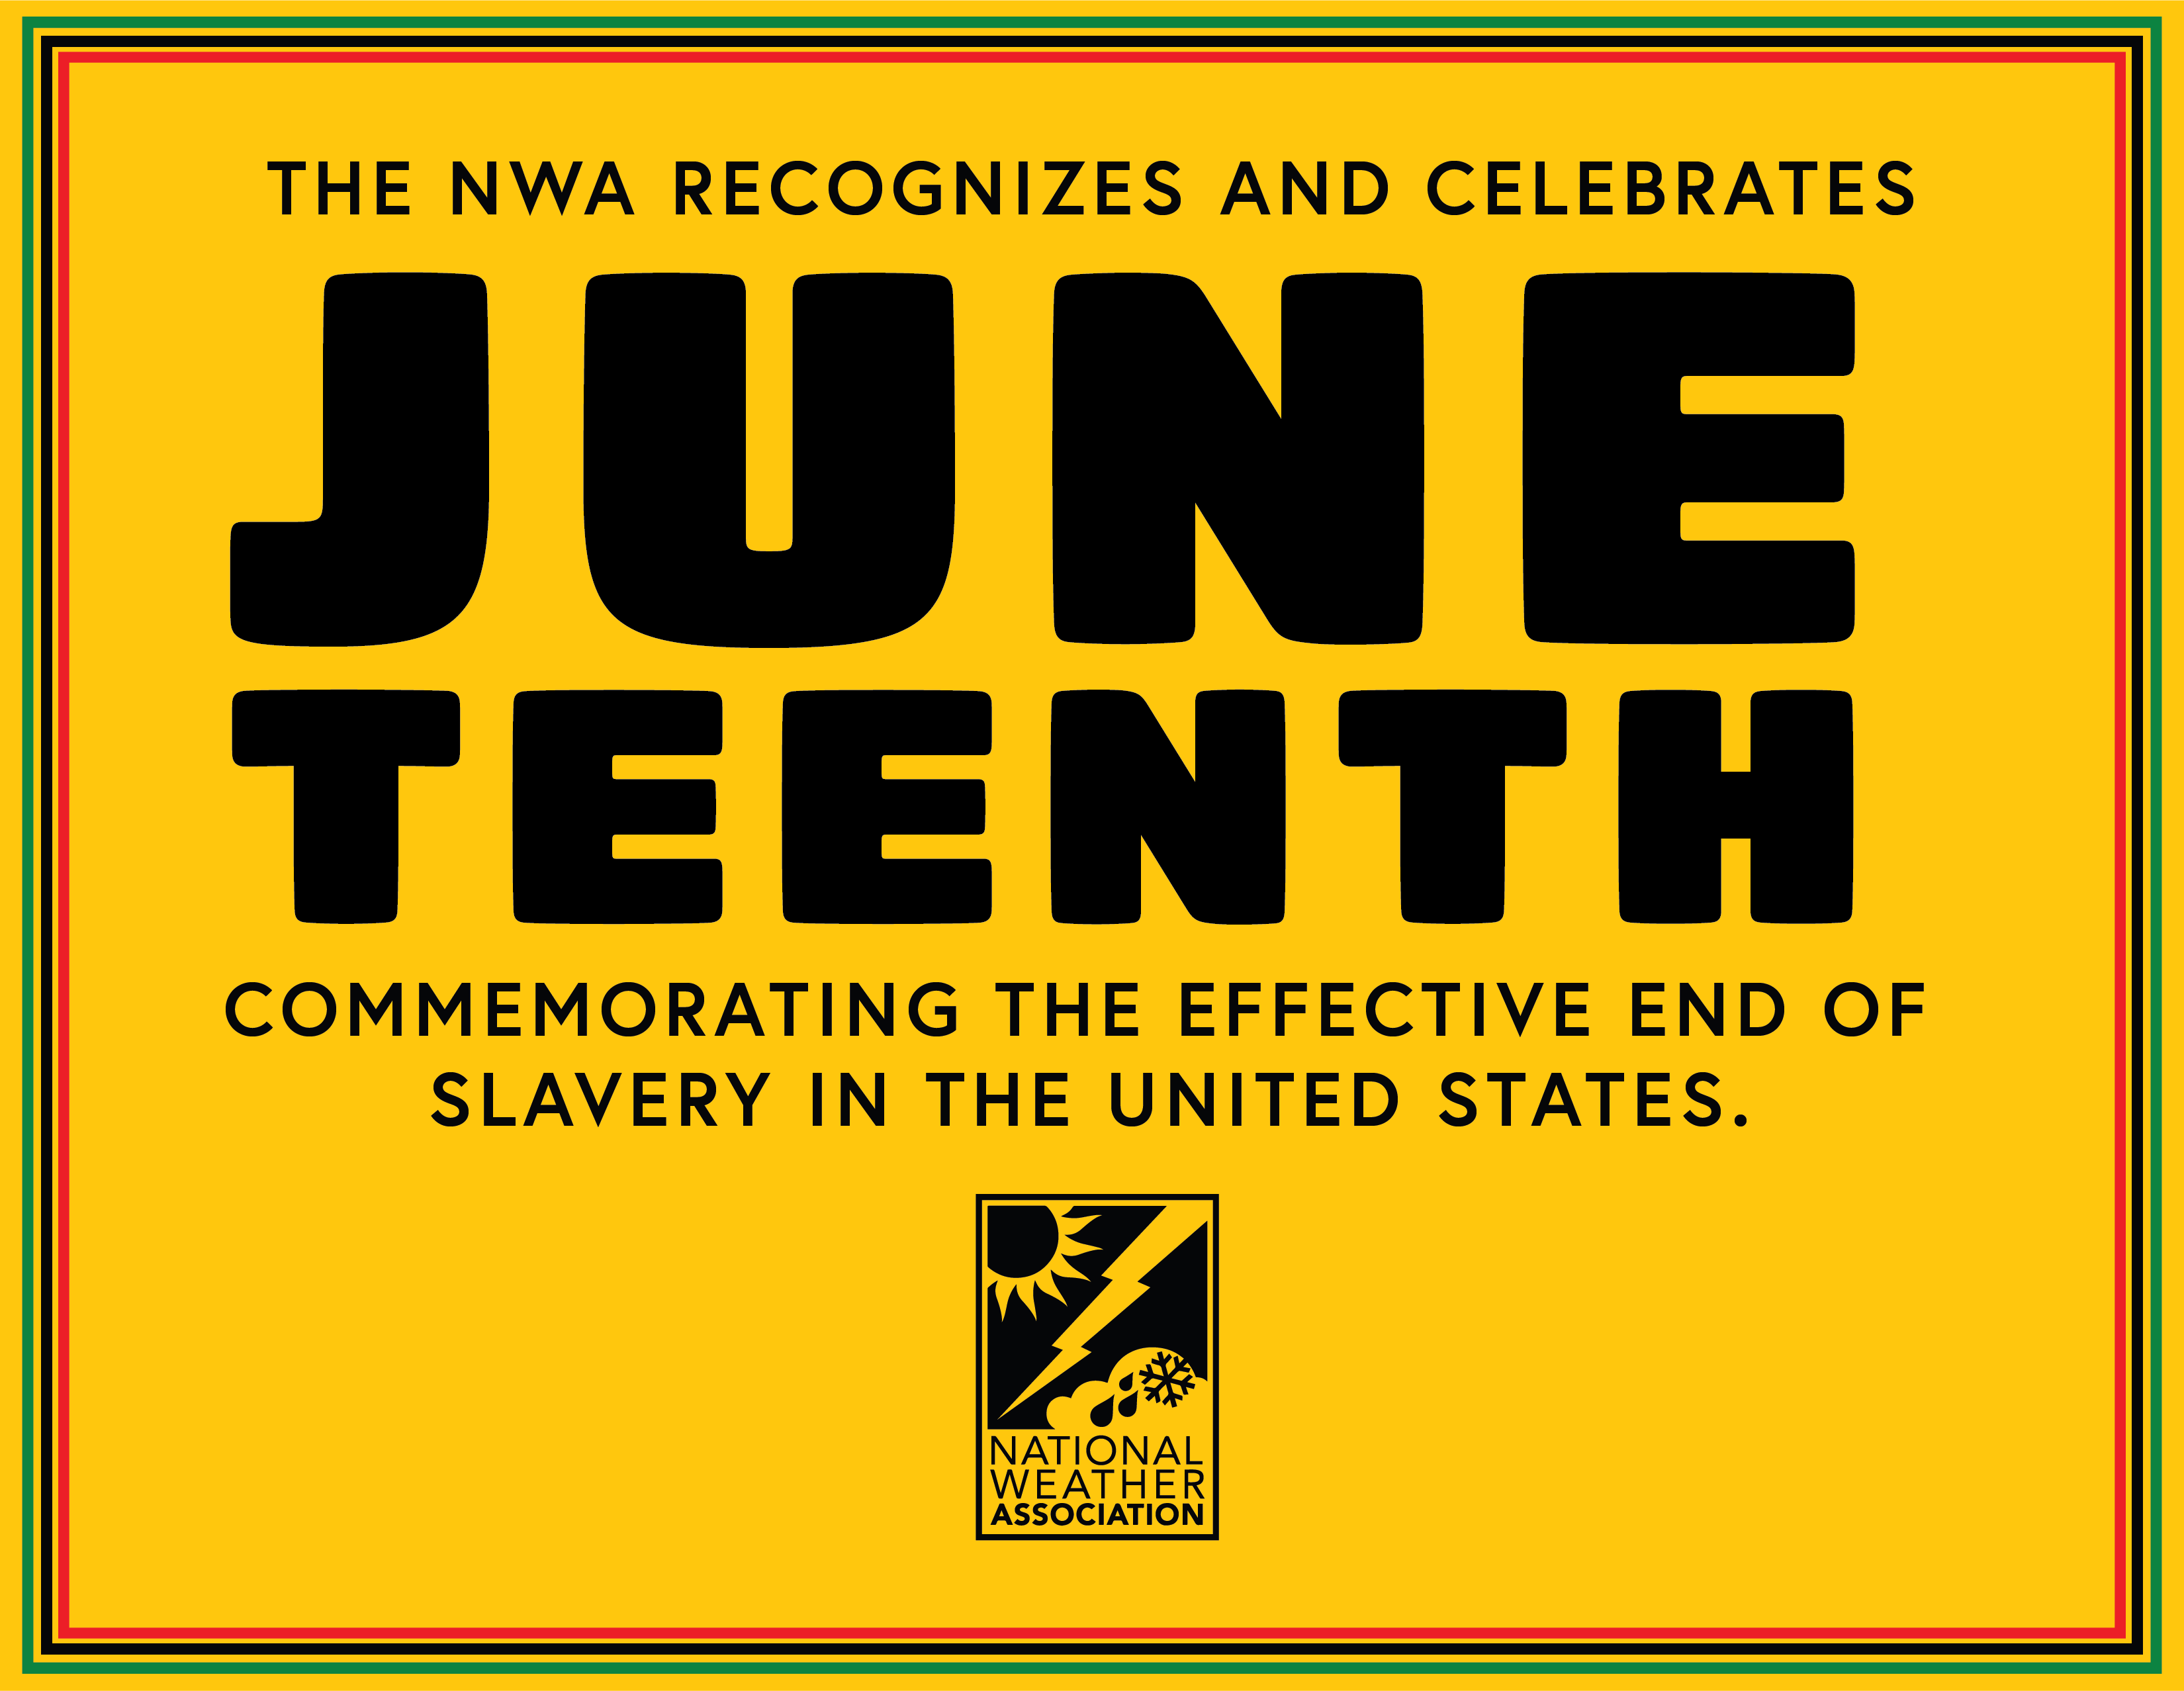 The NWA Recognizes and celebrates Juneteenth, commemorating the effective end of slavery in the united states. 